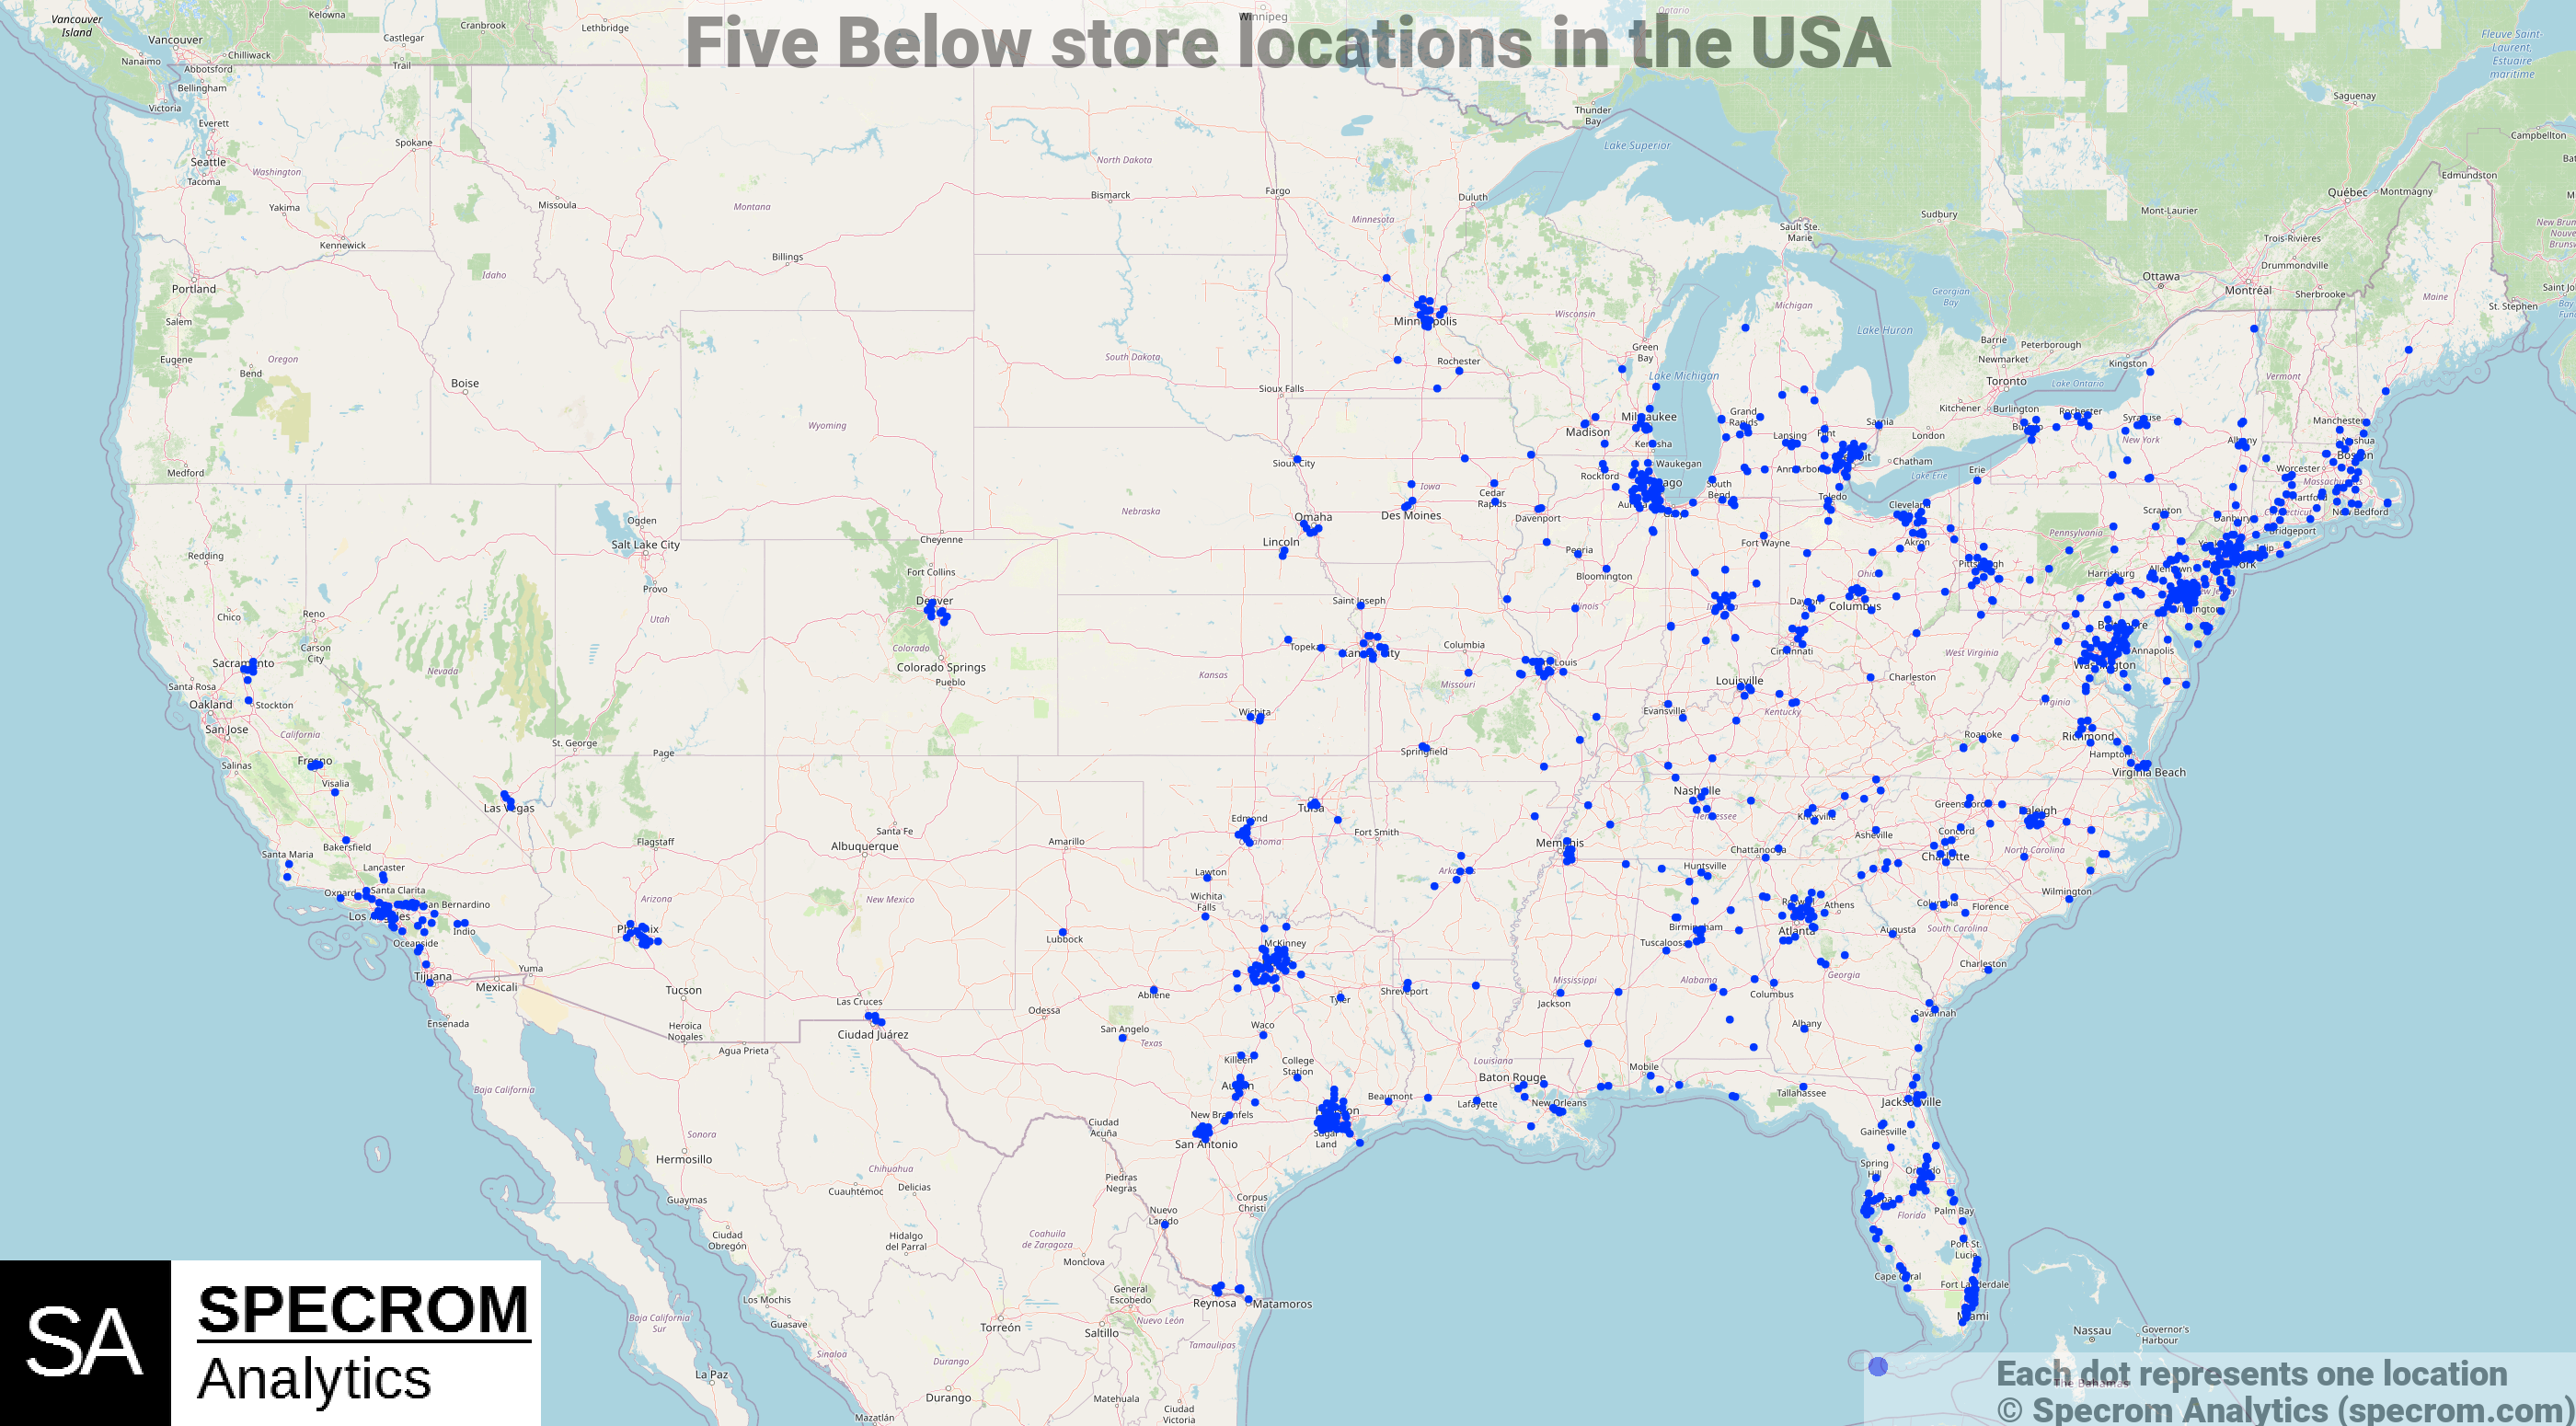 Five Below store locations in the USA